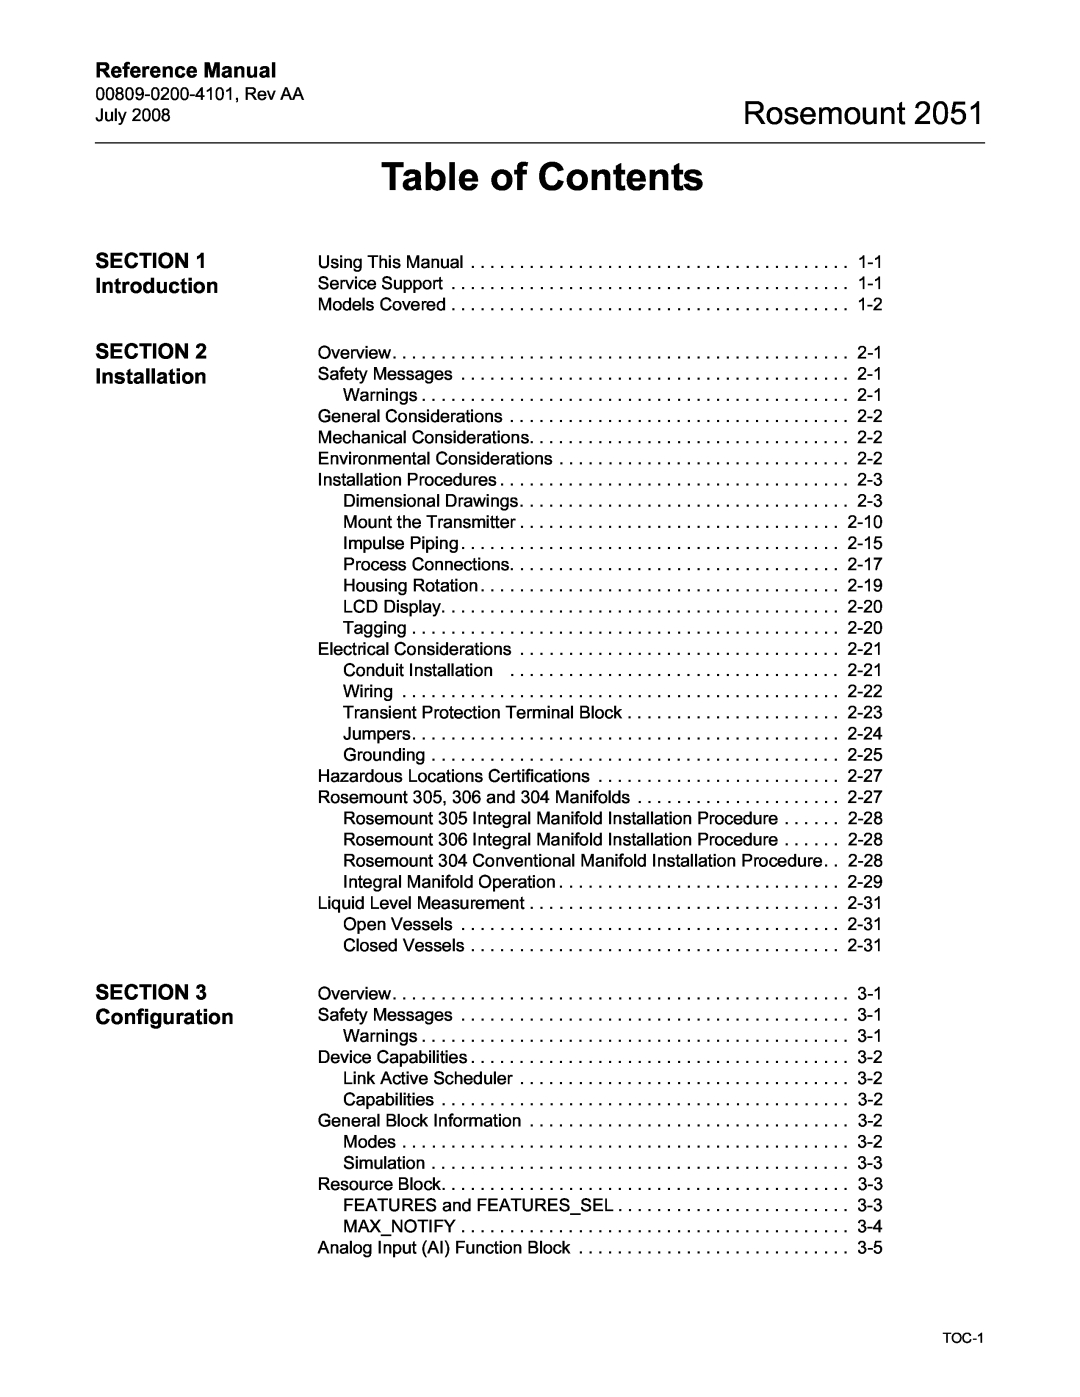 Emerson Process Management 2051 Table of Contents, Introduction Installation, Configuration, Rosemount, Reference Manual 